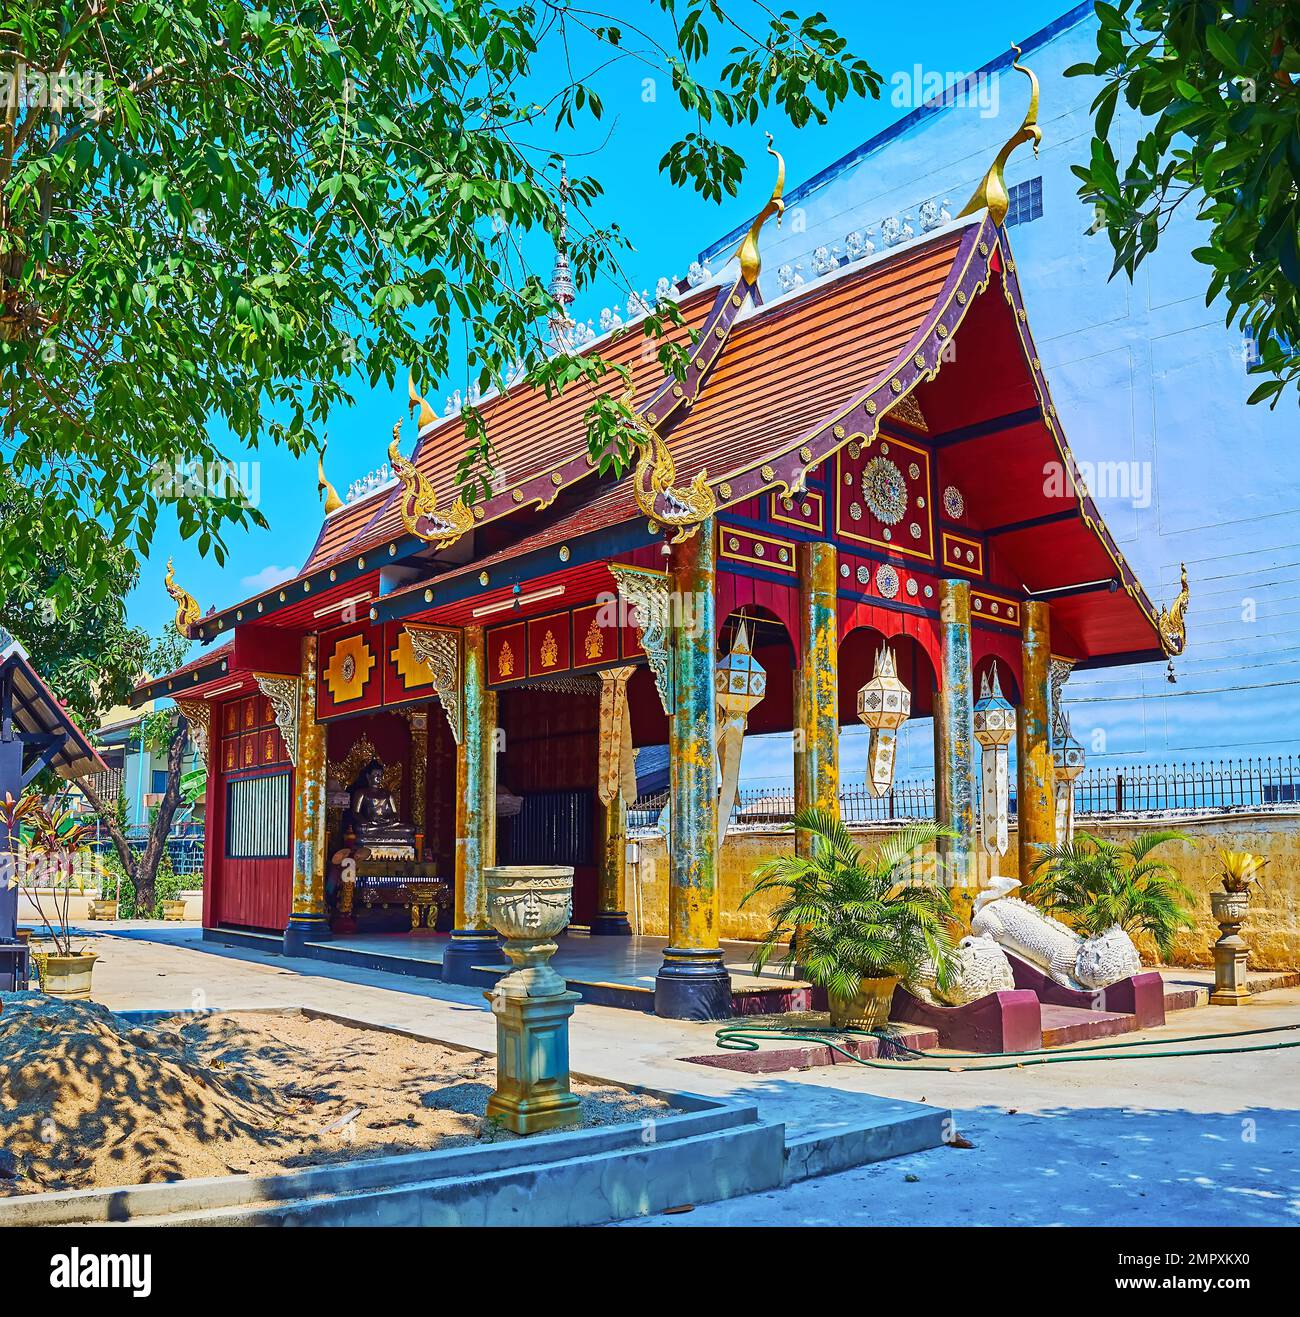 The tiny shrine of a small Wat Hor Pra temple, decorated with gilt columns, pyathat roof, Lanna lanterns and Buddha Image inside, Chiang Mai, Thailand Stock Photo